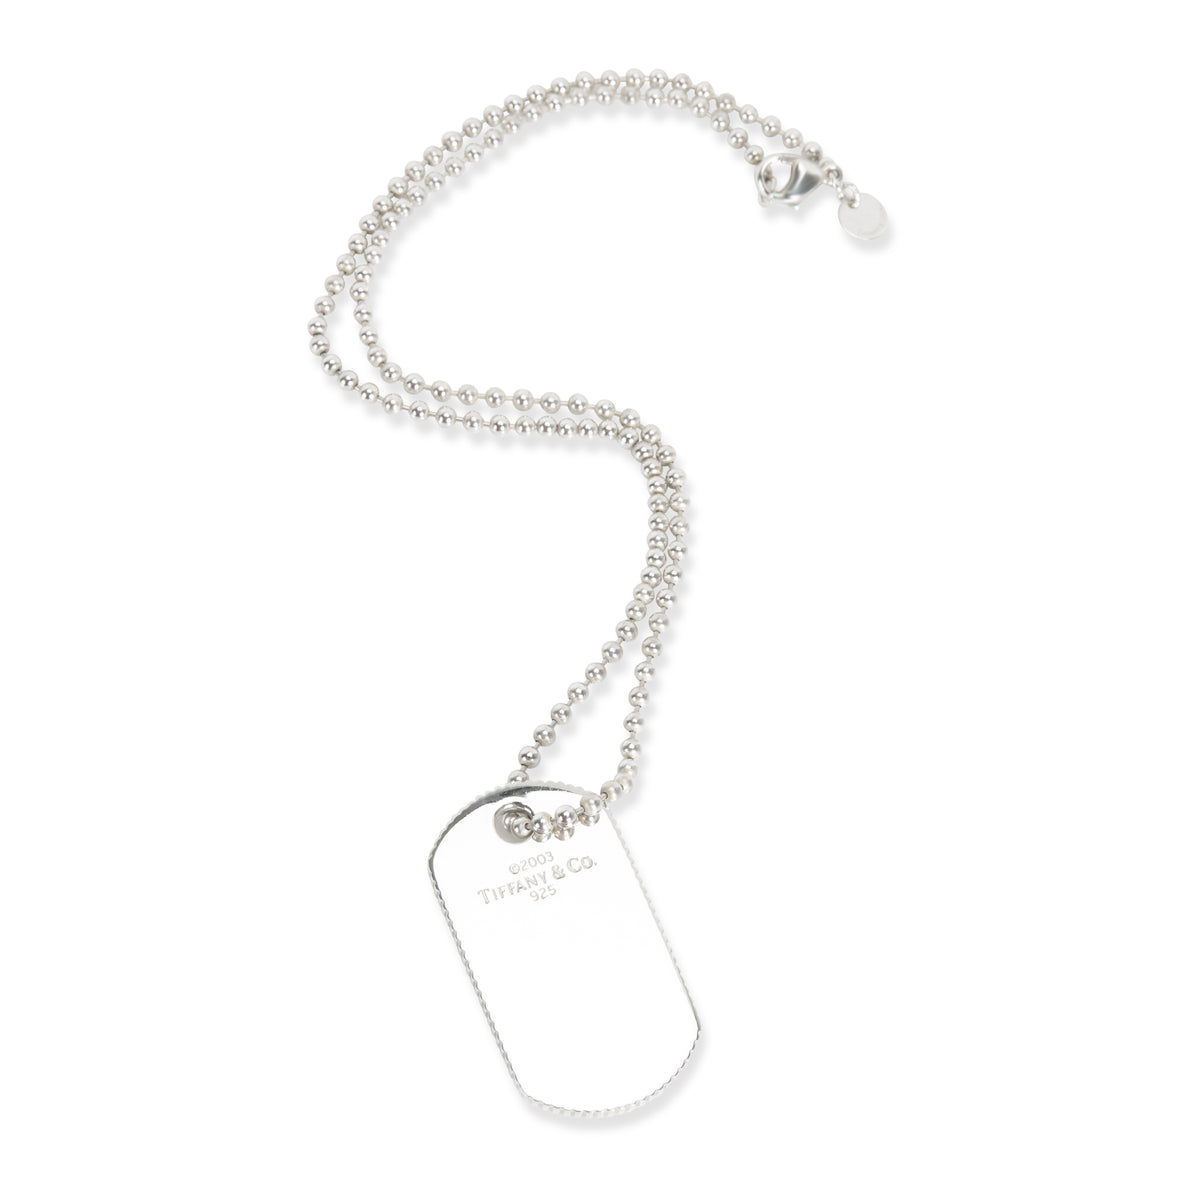 Tiffany & Co. Dog Tag Necklace in Sterling Silver – myGemma